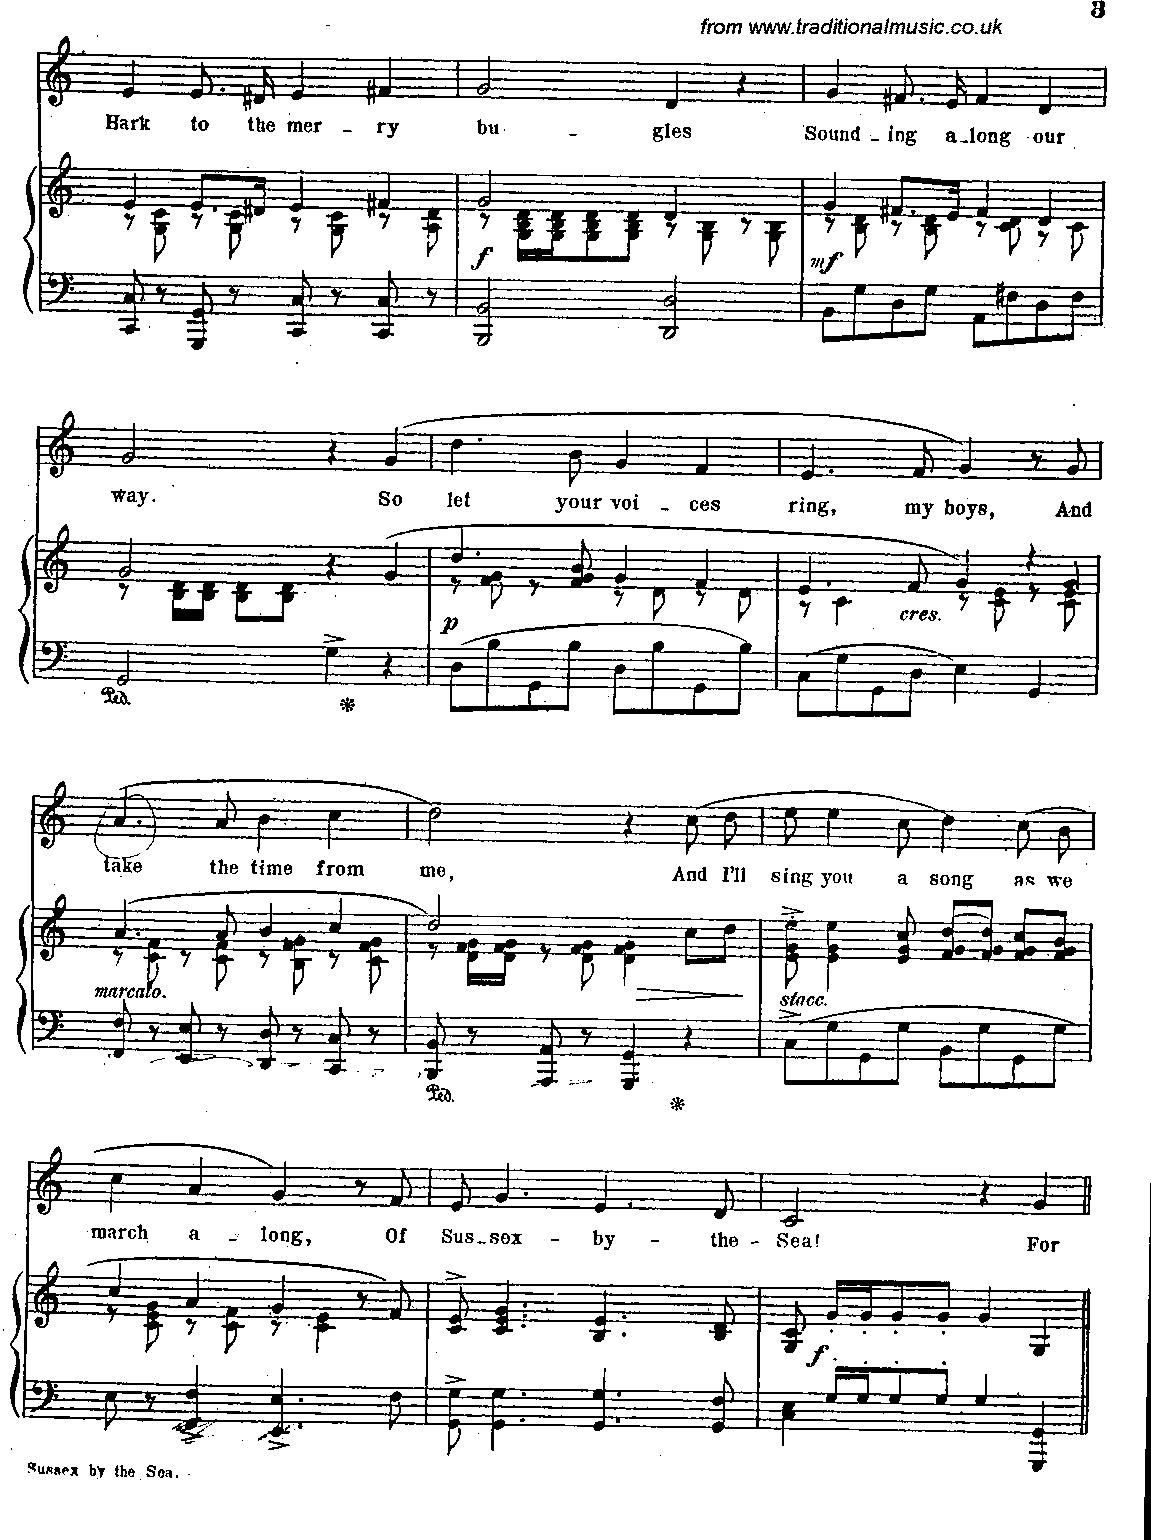 Sussex By The Sea, Complete Score, page 3 of 11